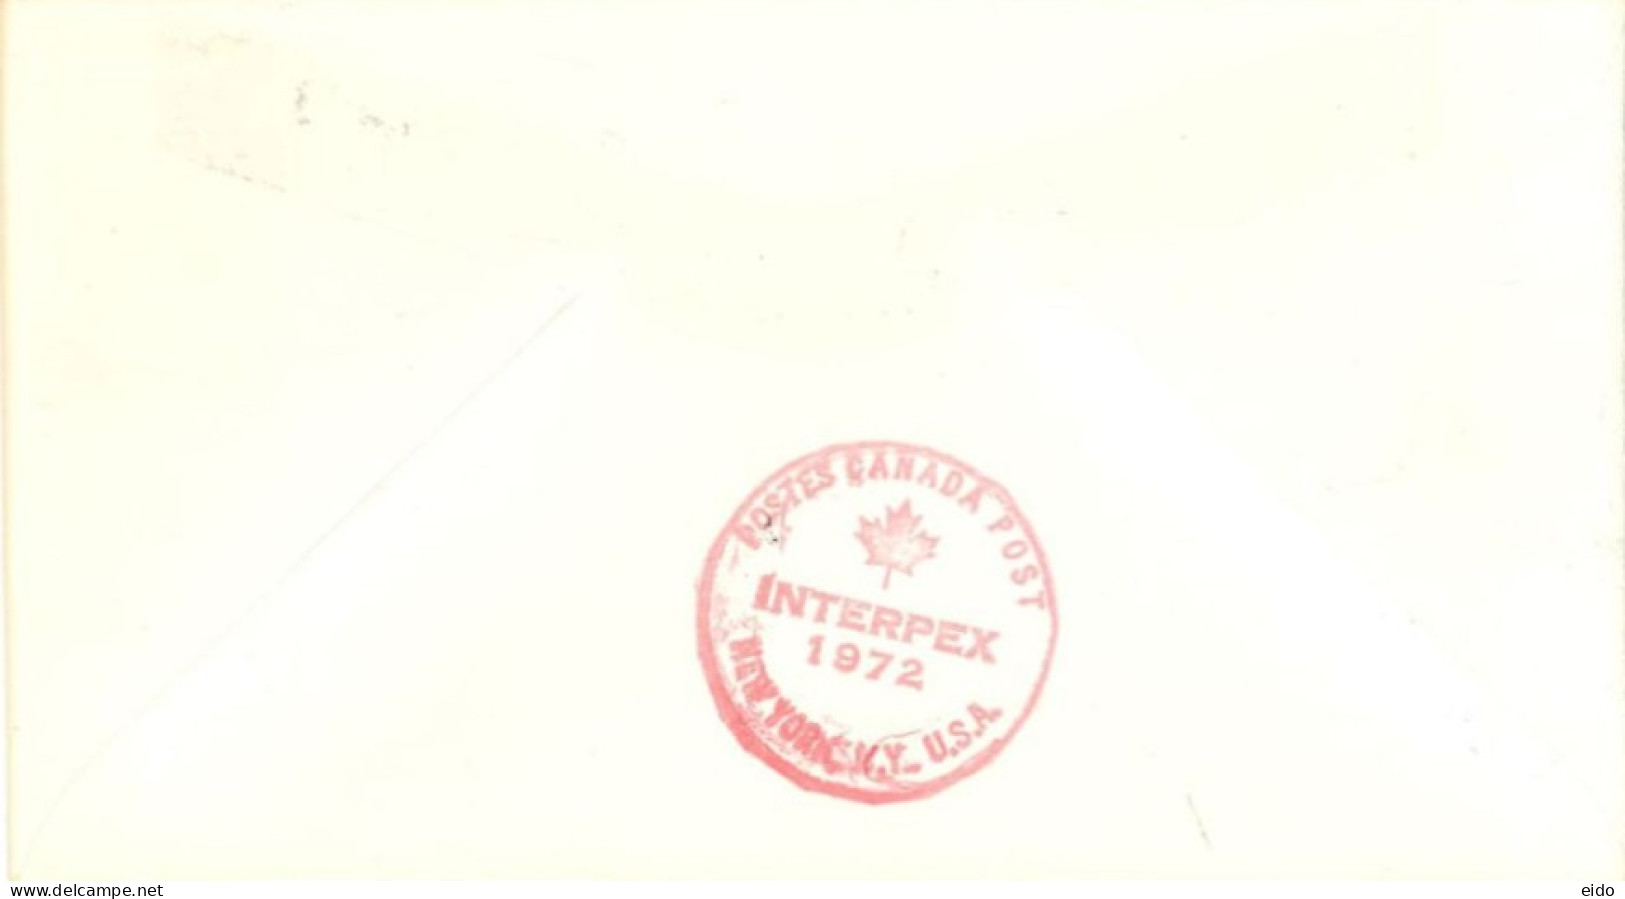 U.S.A.. -1968 -  OFFICIAL STAMP COVER OF FAMILY PLANNING AT INTERNATIONAL STAMP SHOW STATION, NEW YORK - Covers & Documents